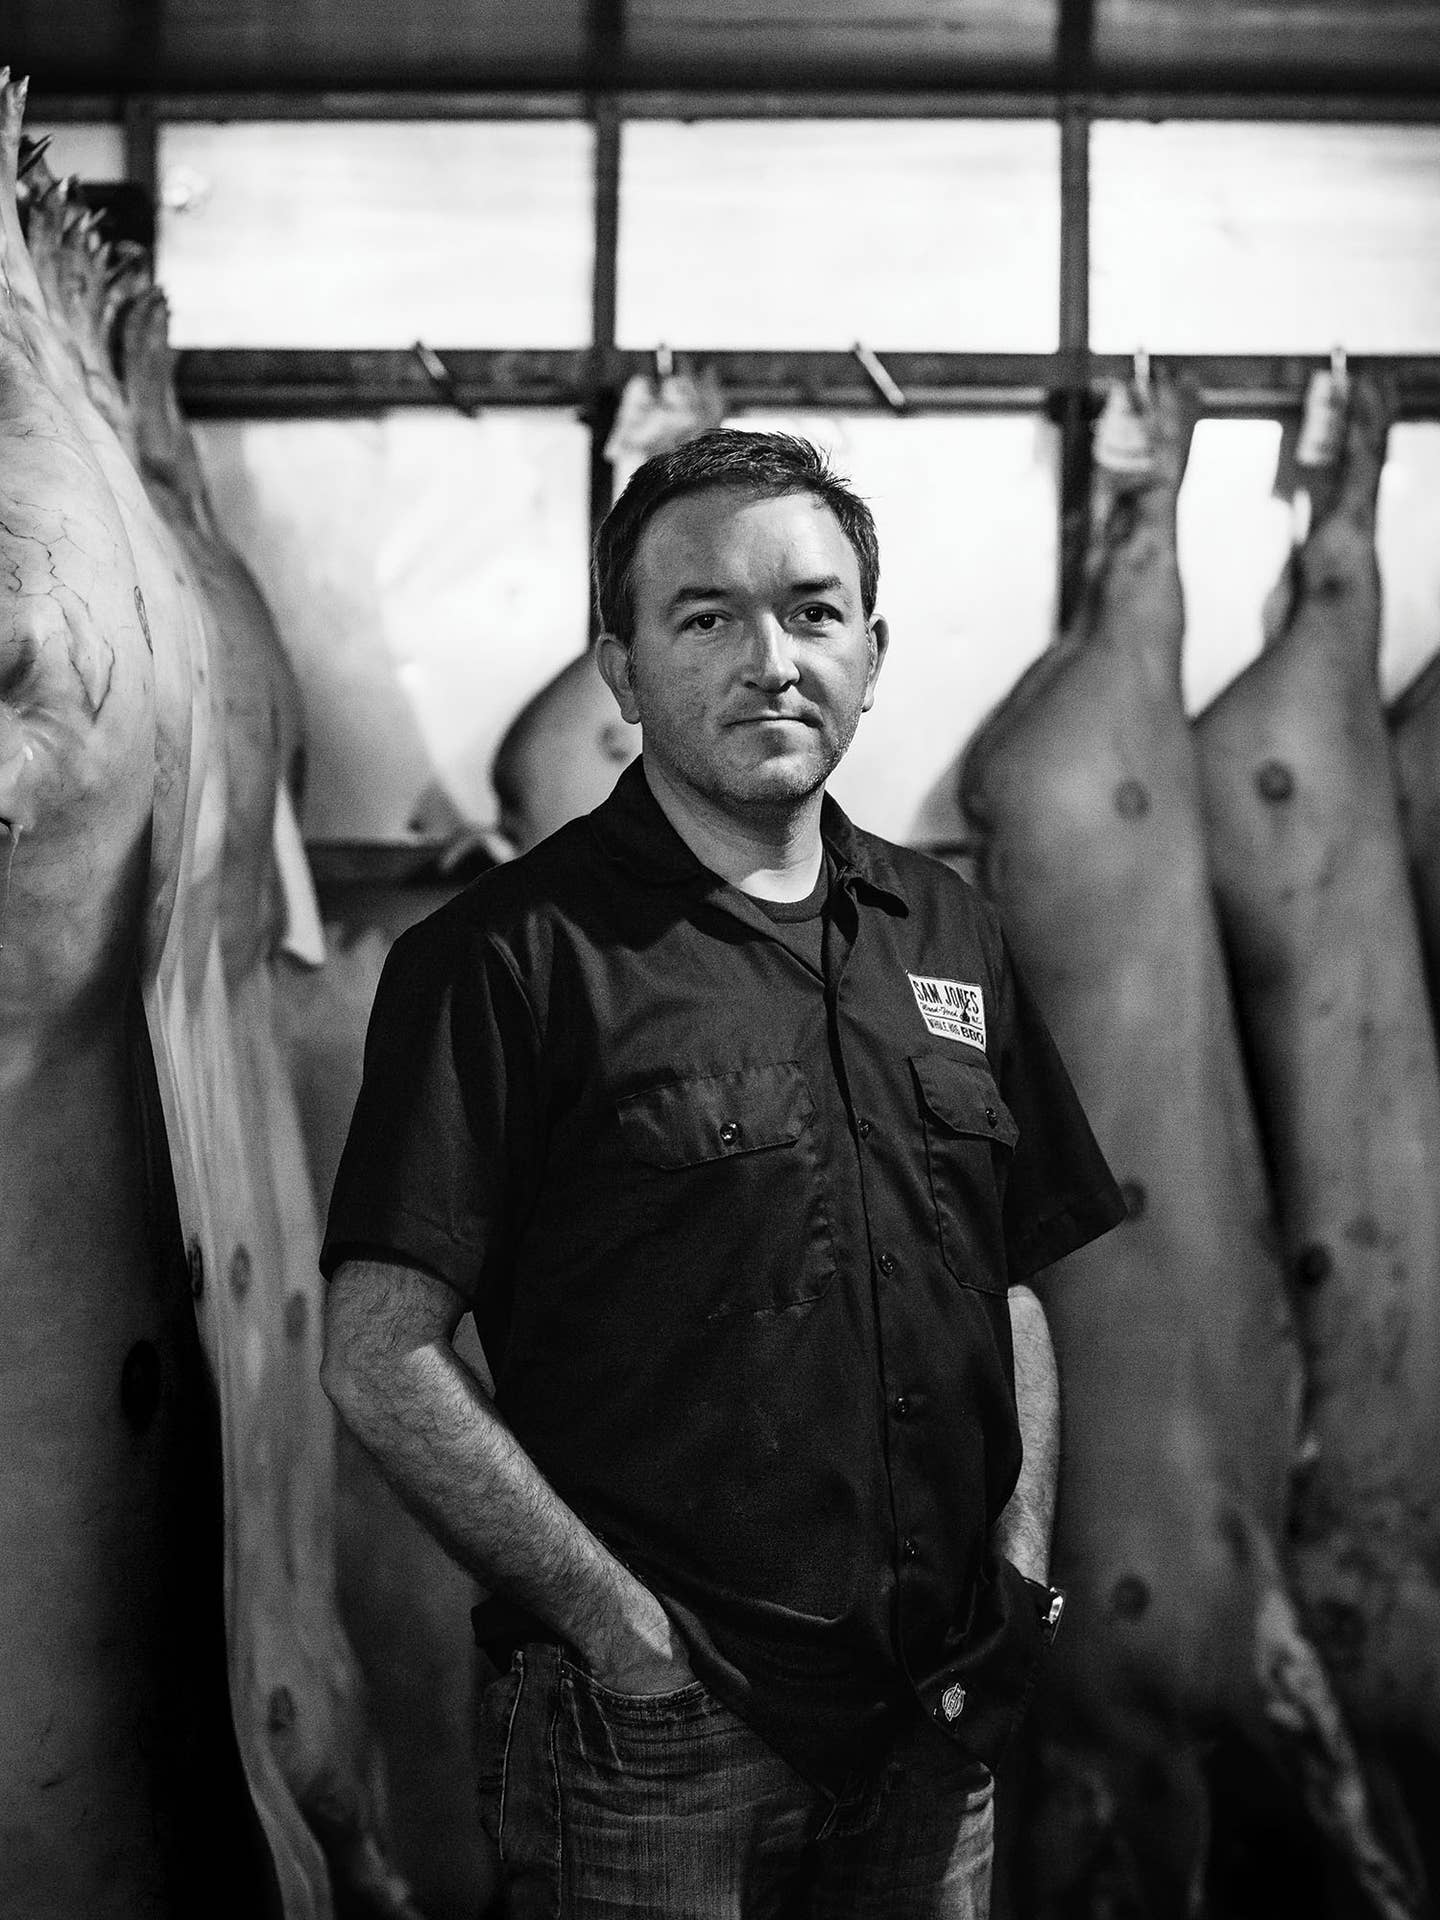 Why Pitmaster Sam Jones Won’t Give Up Whole Hog Barbecue, “The Most Financially Irresponsible Thing You Can Do”